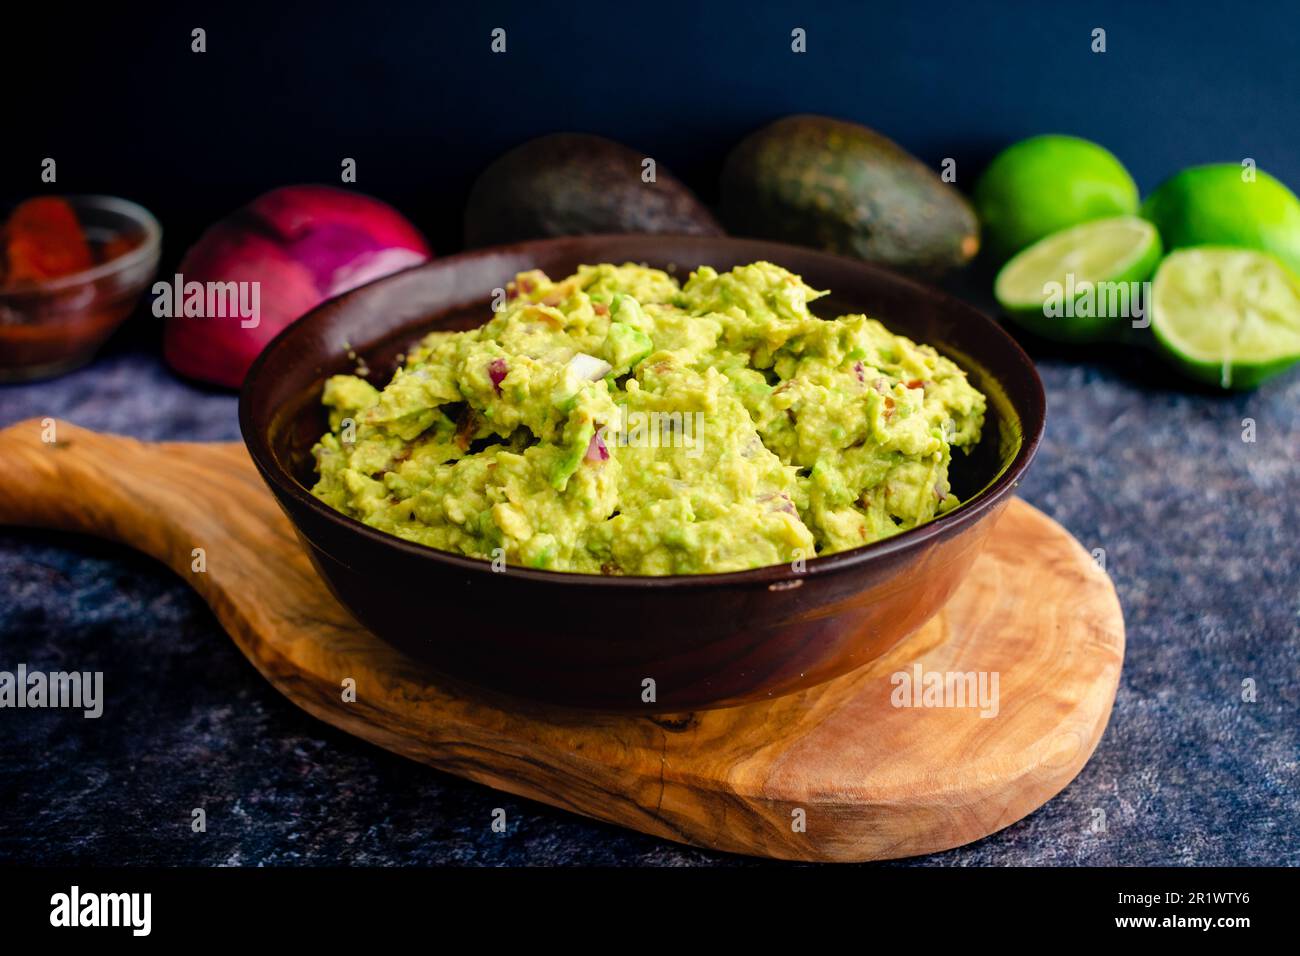 Fresh Guacamole in a Wooden Bowl with Ingredients in the Background: Homemade guacamole with avocados, limes, onion, cilantro, and chipotle peppers Stock Photo